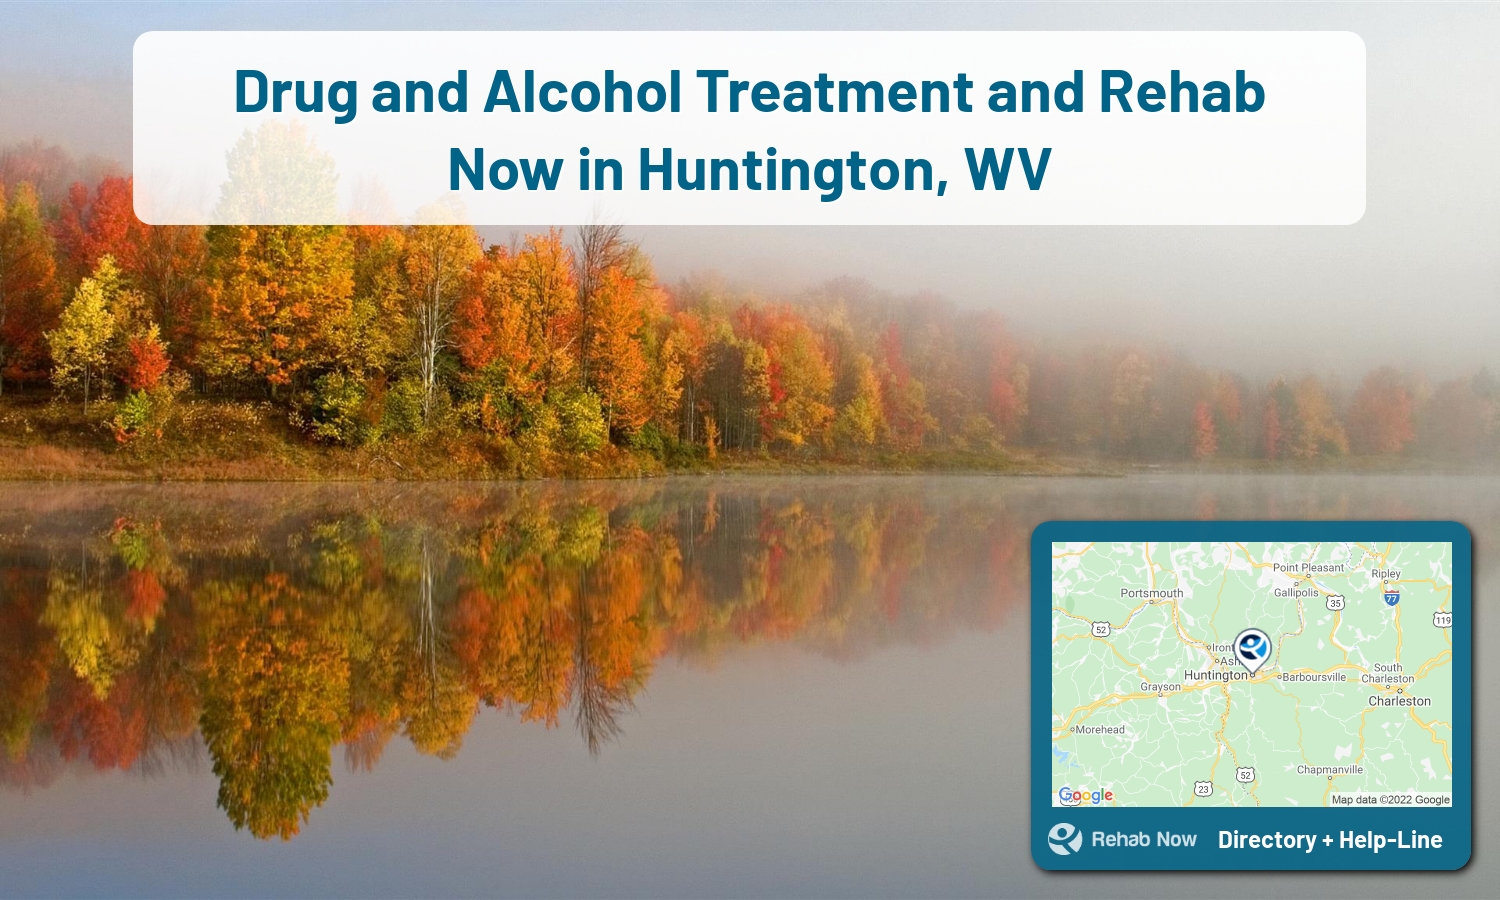 Our experts can help you find treatment now in Huntington, West Virginia. We list drug rehab and alcohol centers in West Virginia.